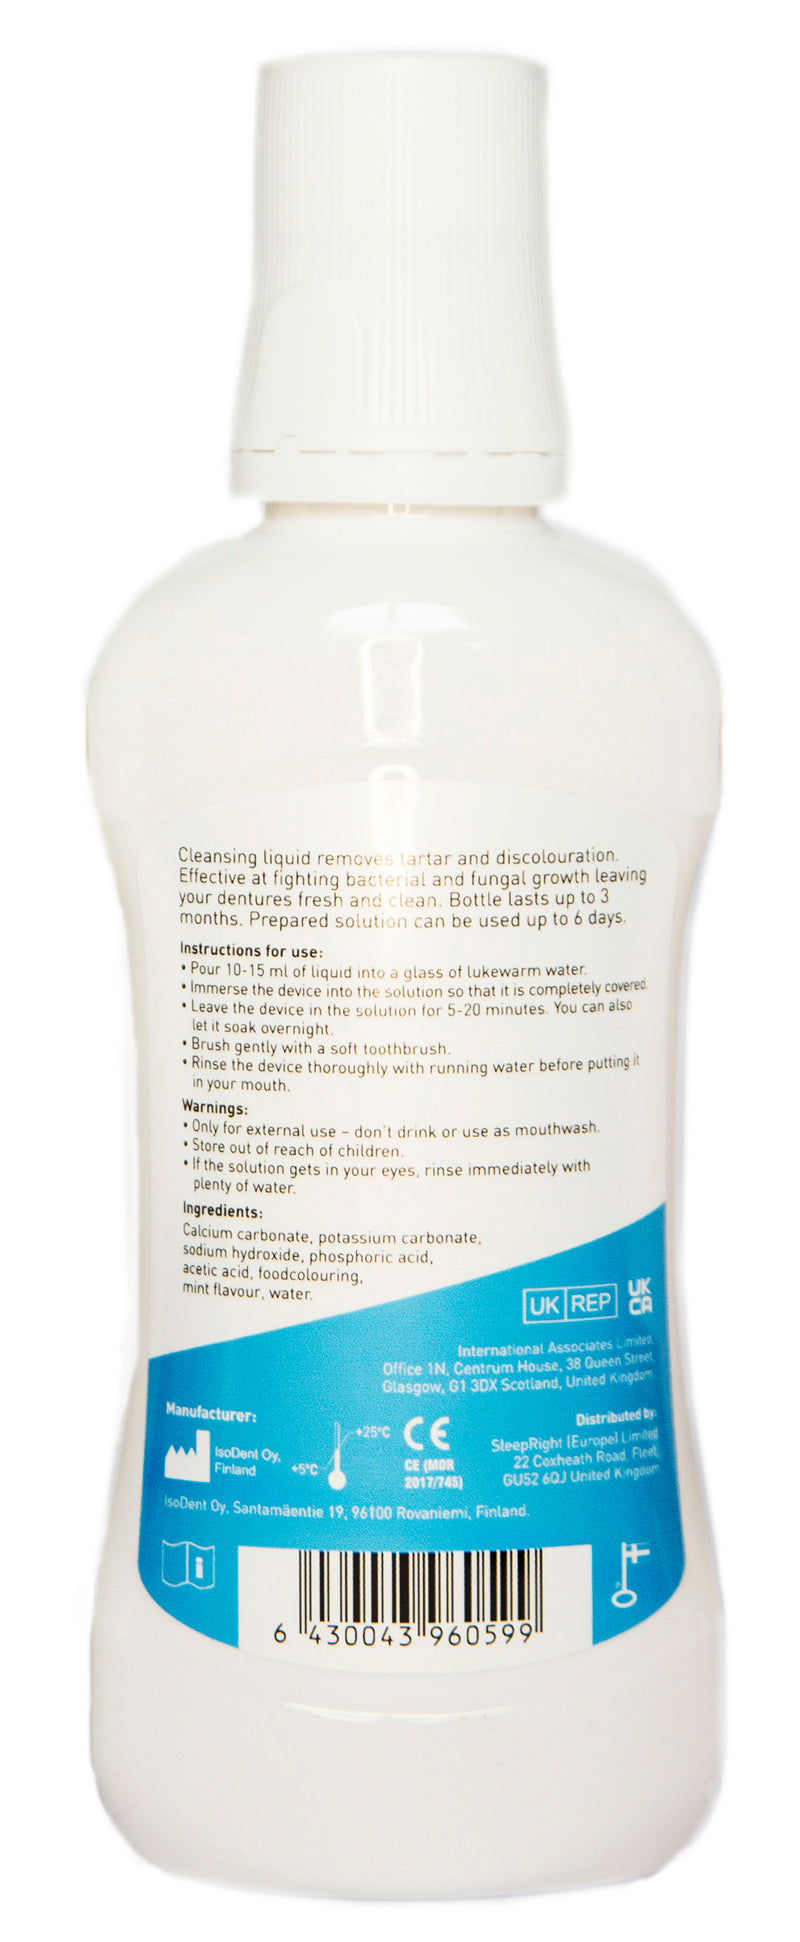 FreshGuard Denture Clean Concentrated Liquid Cleanser For Metal & Plastic Base Dentures - 3 Months Use